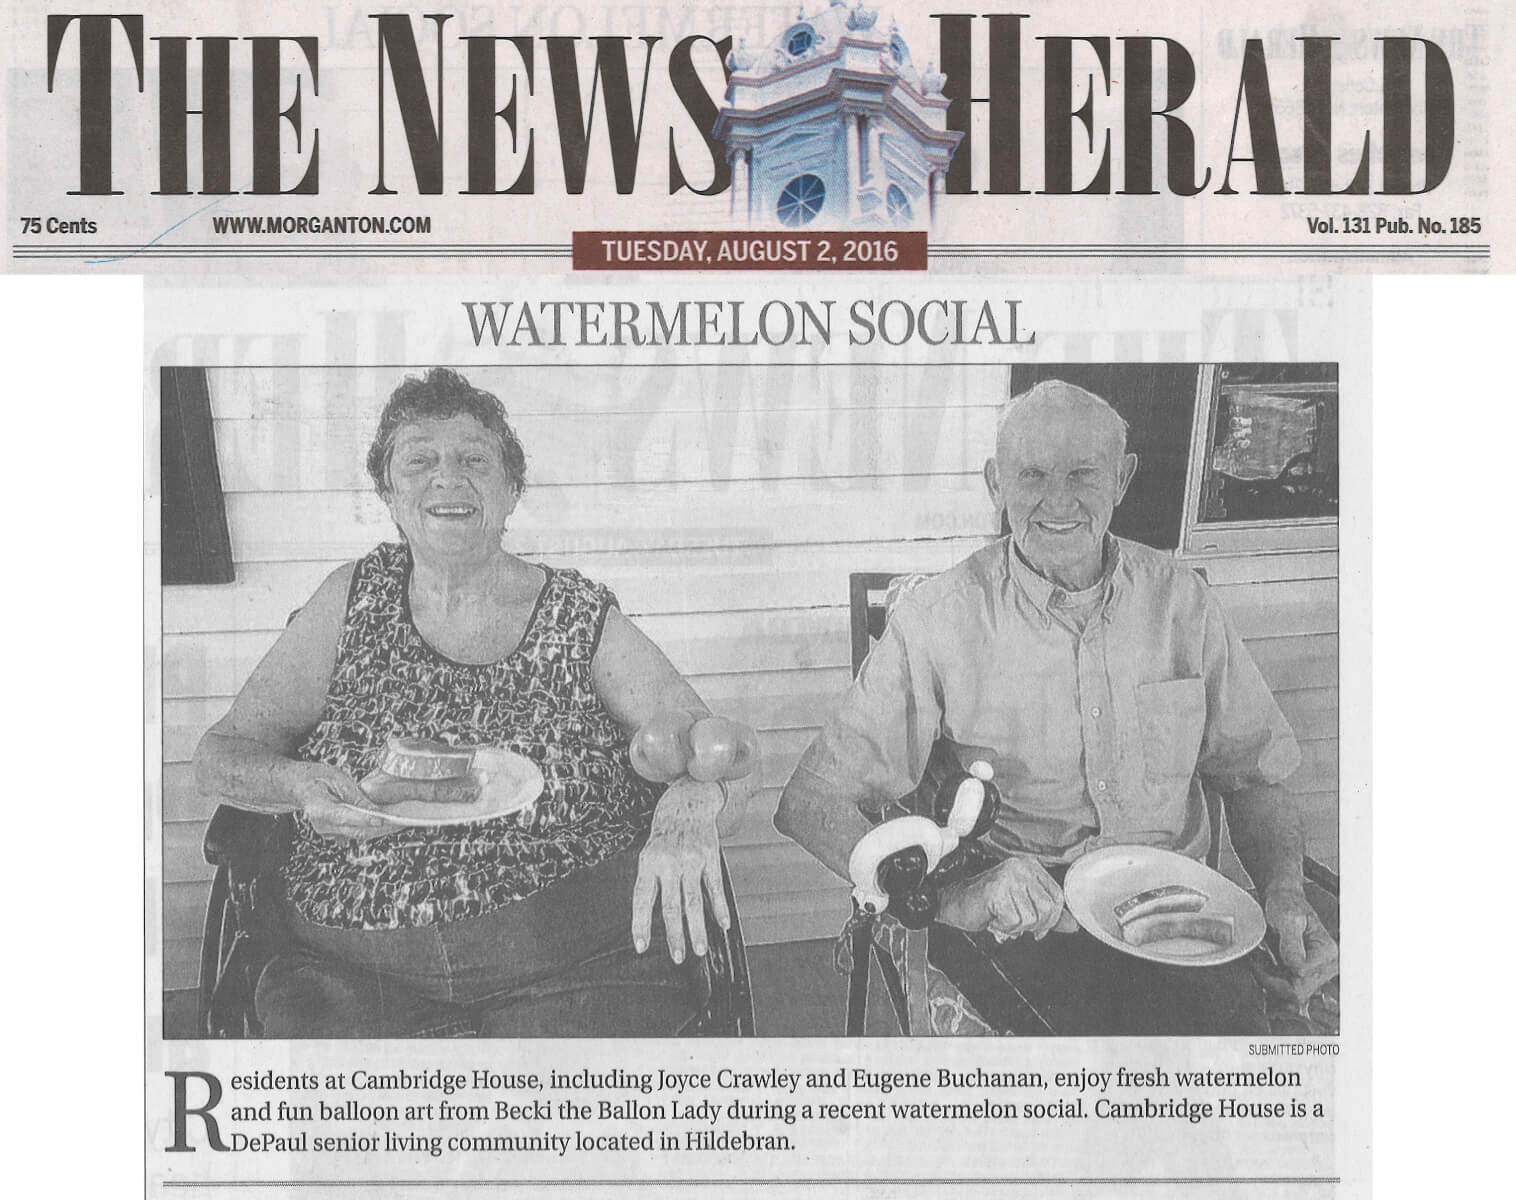 Cambridge House has a Watermelon Social photo in the News Herald August 2, 2016